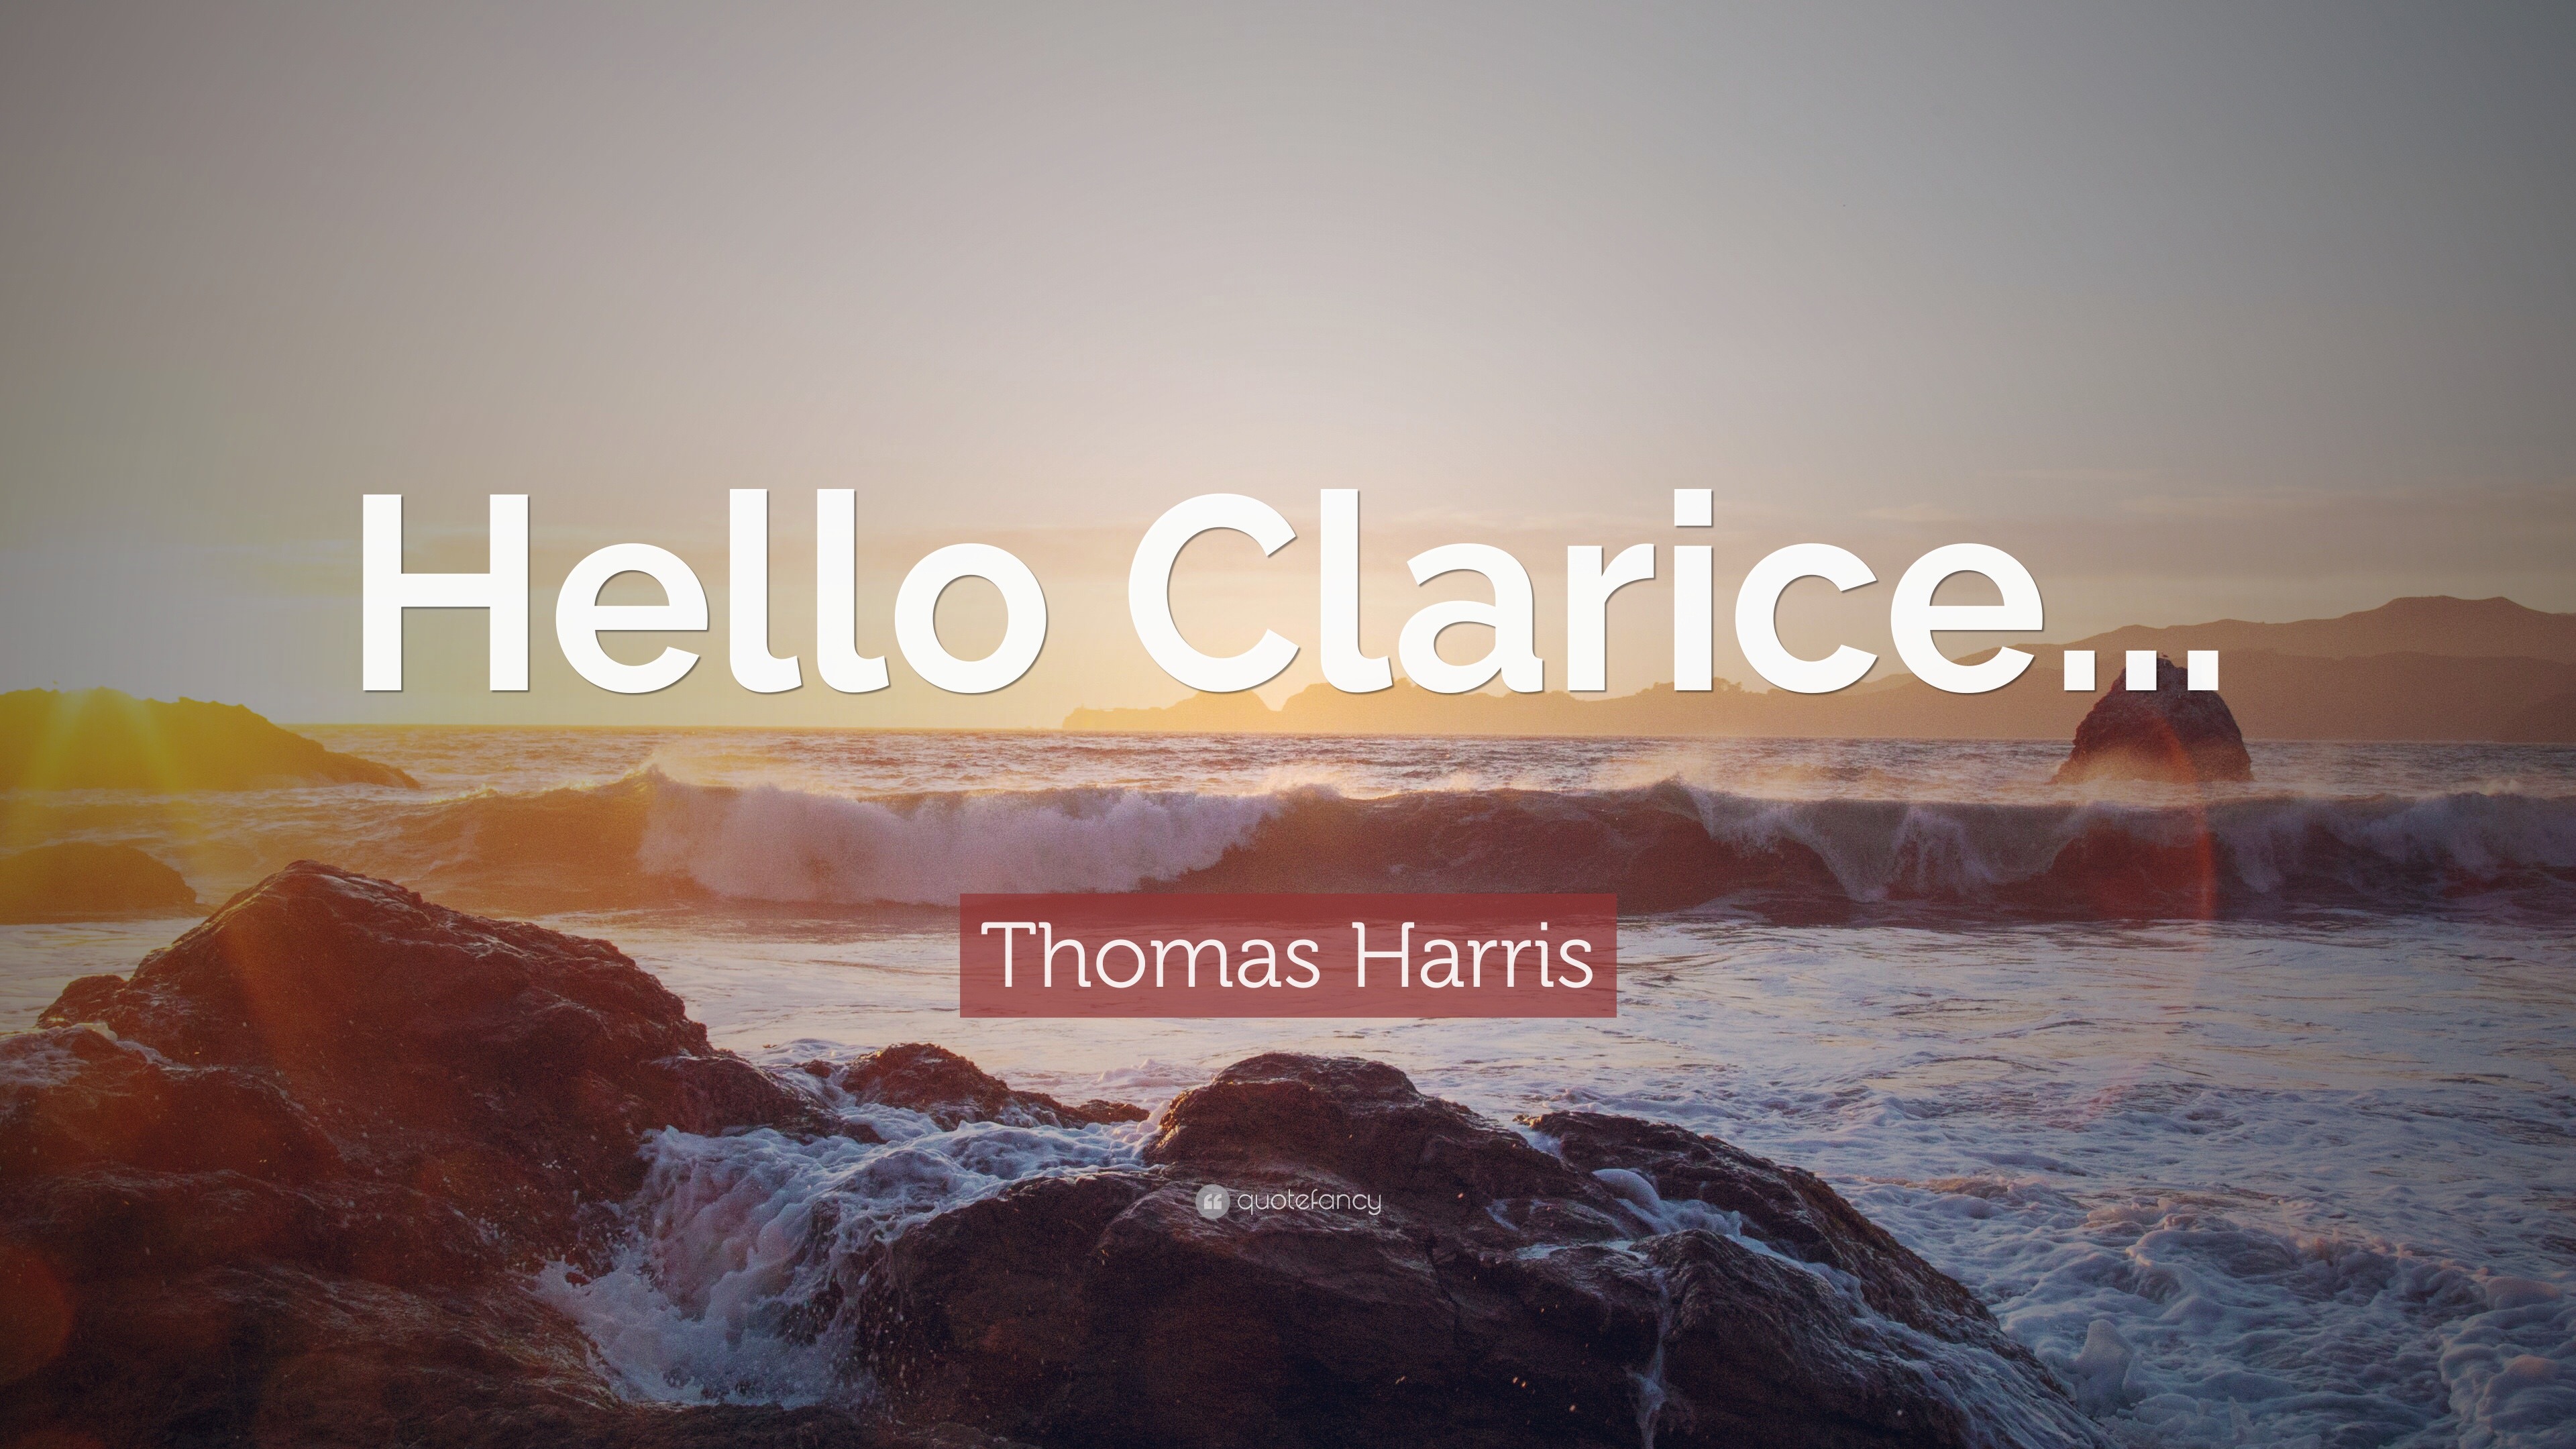 Thomas Harris Quote Hello Clarice 10 Wallpapers Quotefancy Images, Photos, Reviews